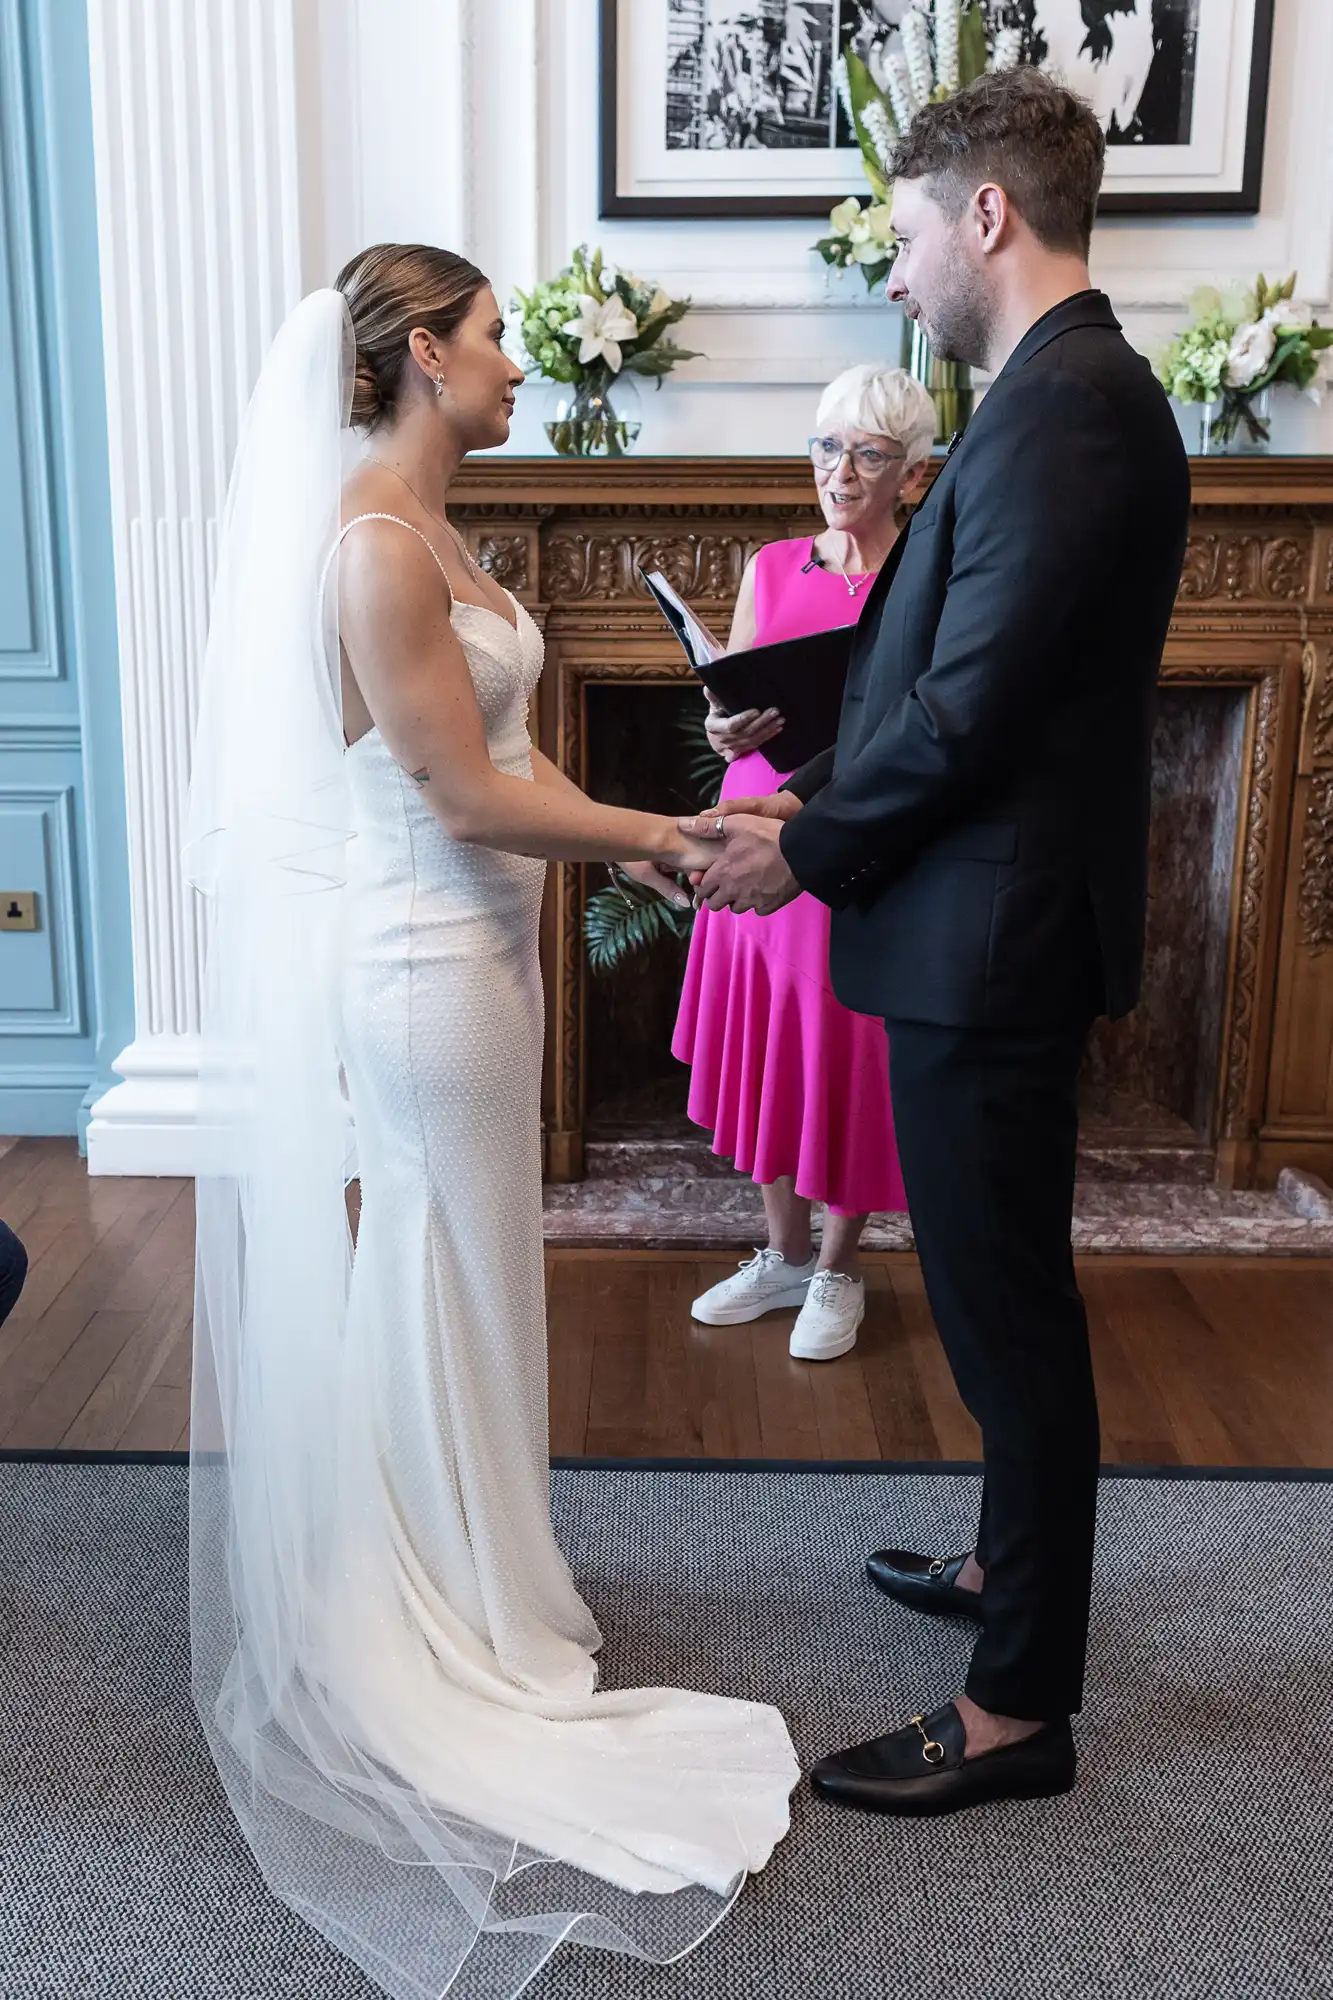 A bride in a white dress and veil and a groom in a dark suit hold hands during their wedding ceremony, with an officiant in pink standing by.